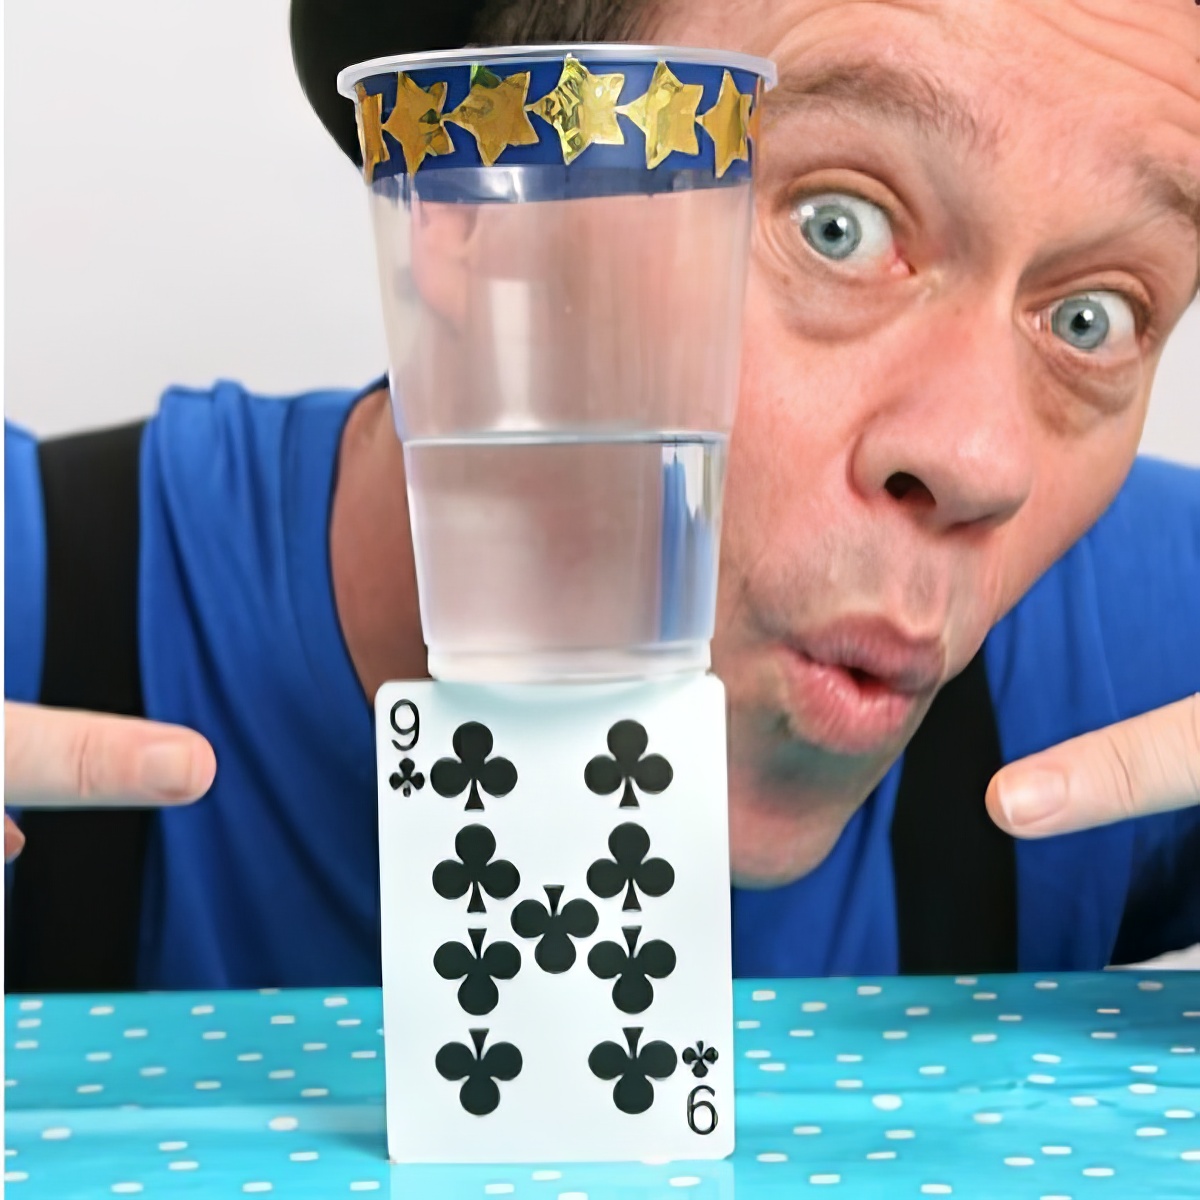 Let your kids learn how to balance a cup of glass in a card with this awesome and fun magic trick!